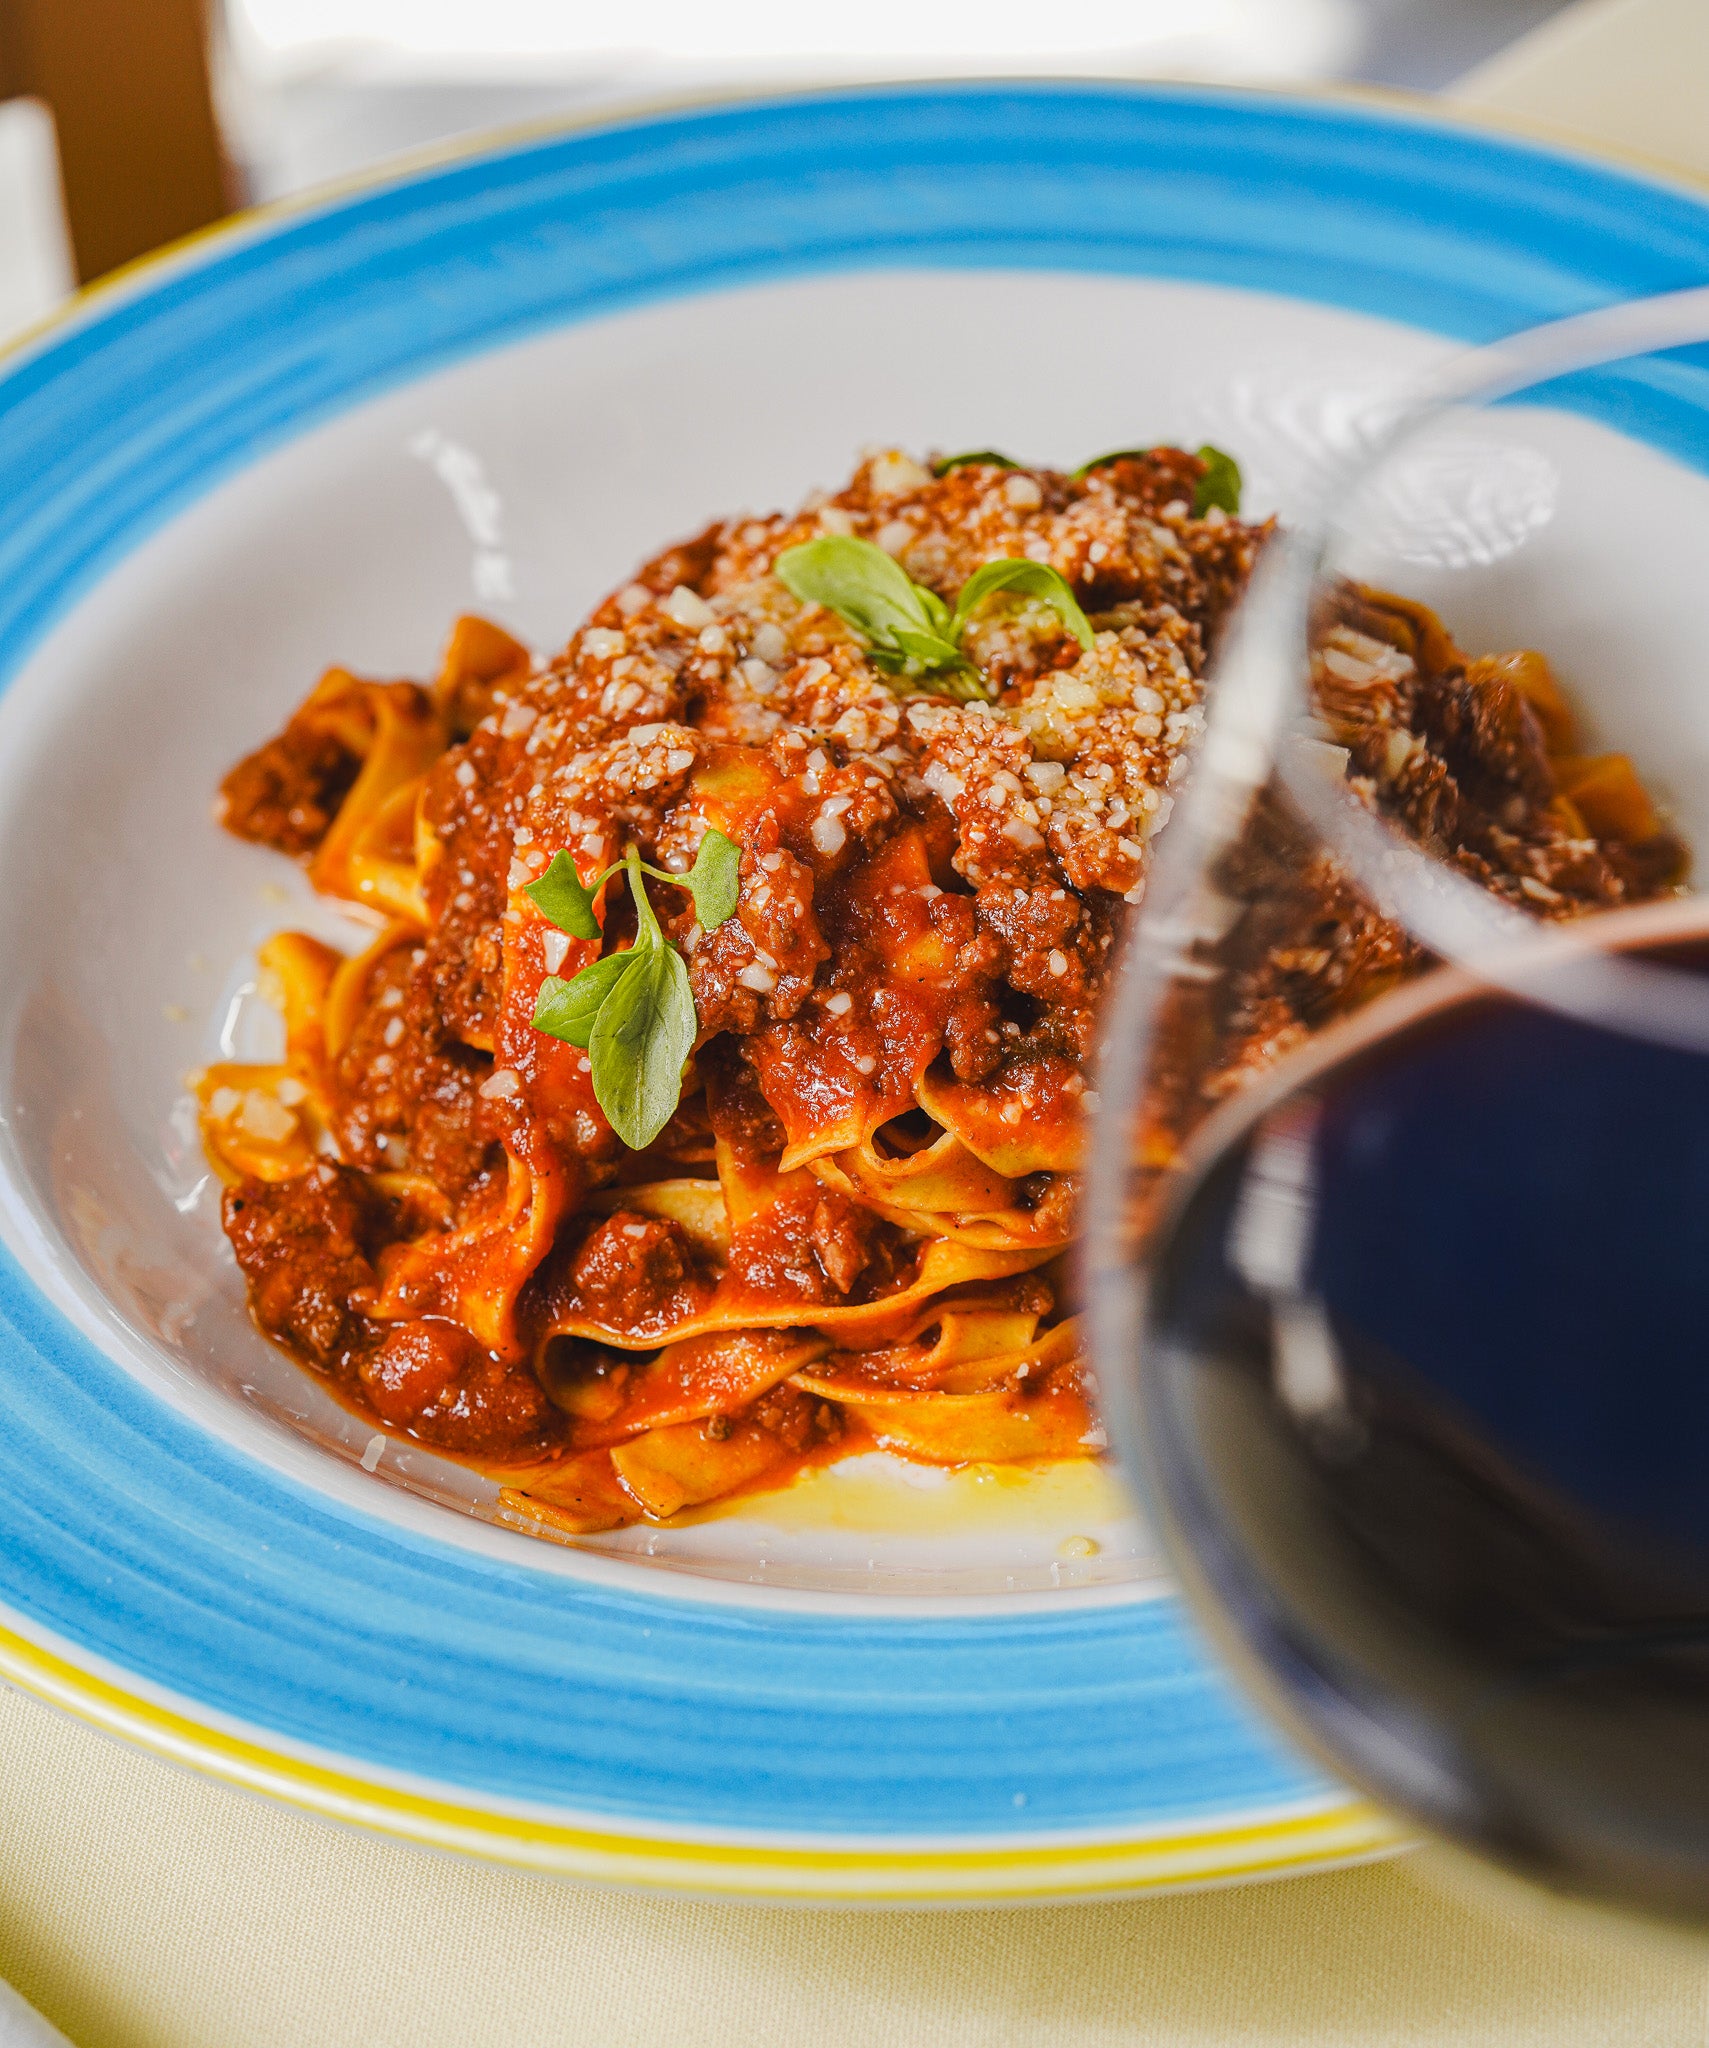 Il Bolognese - Italian food nearby